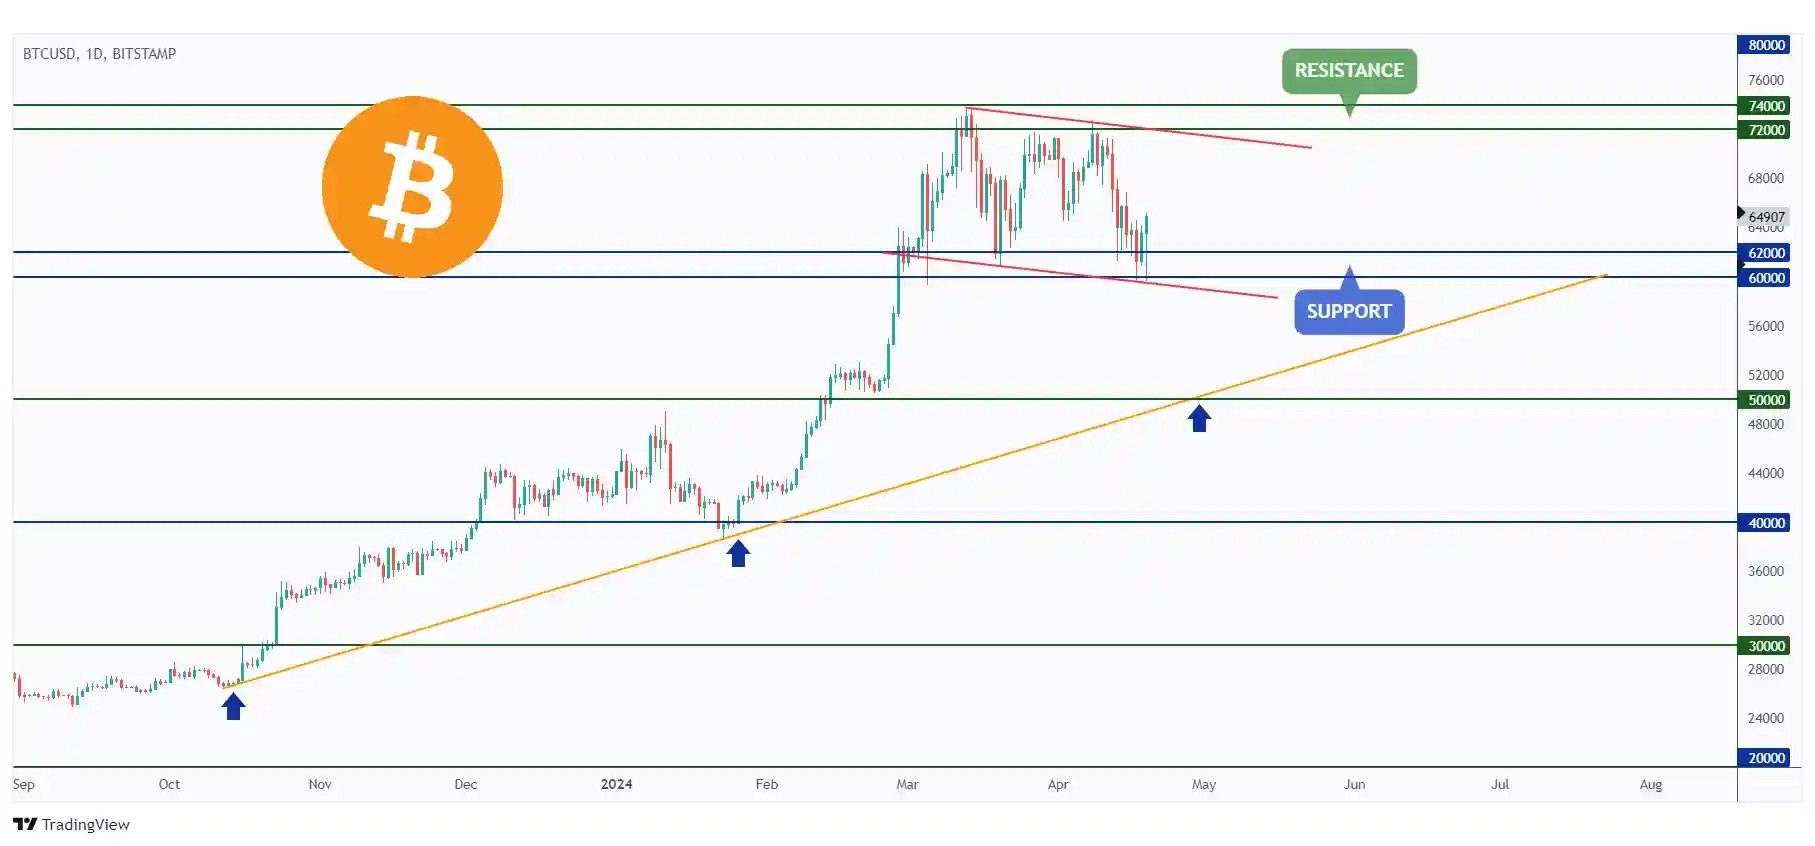 BTC DAILY chart rejecting the $60,000 - $62,000 support and the lower bound of a falling short-term channel.